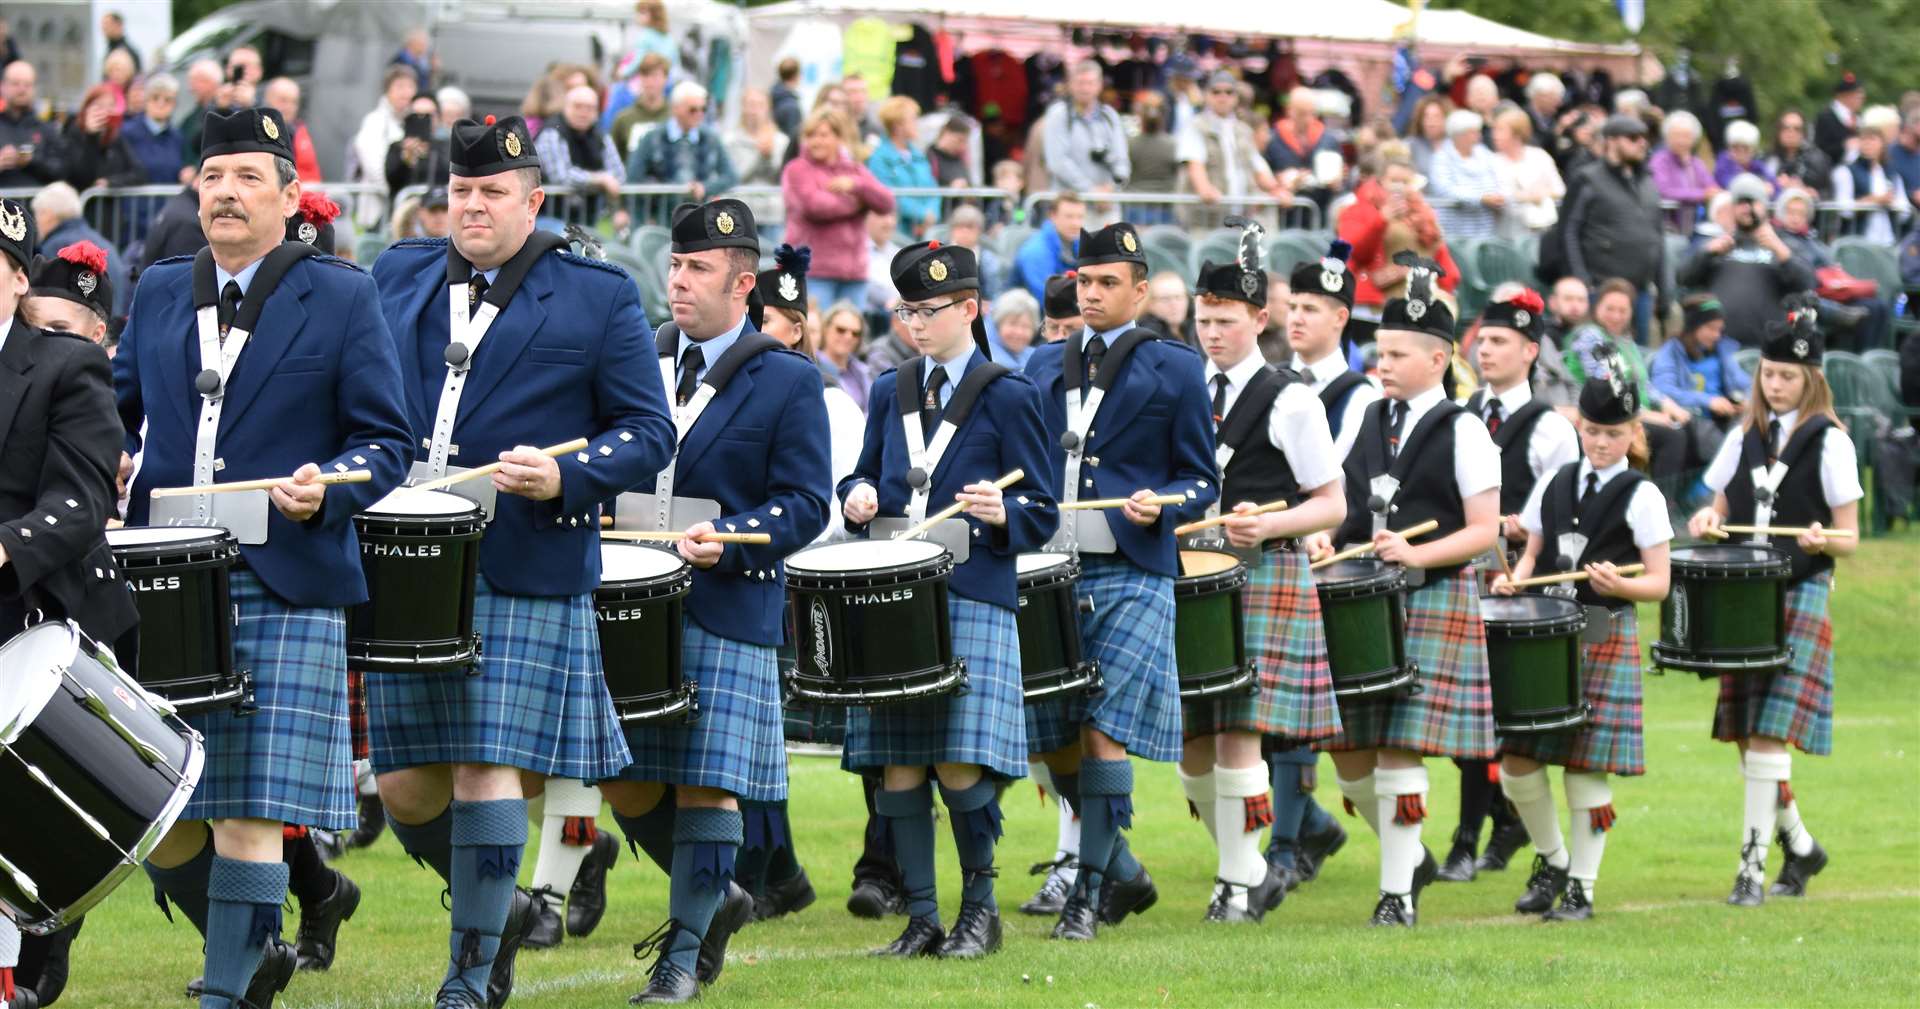 Massed Pipe Bands performing at the games. Picture: Becky Saunderson. Image No.044383.